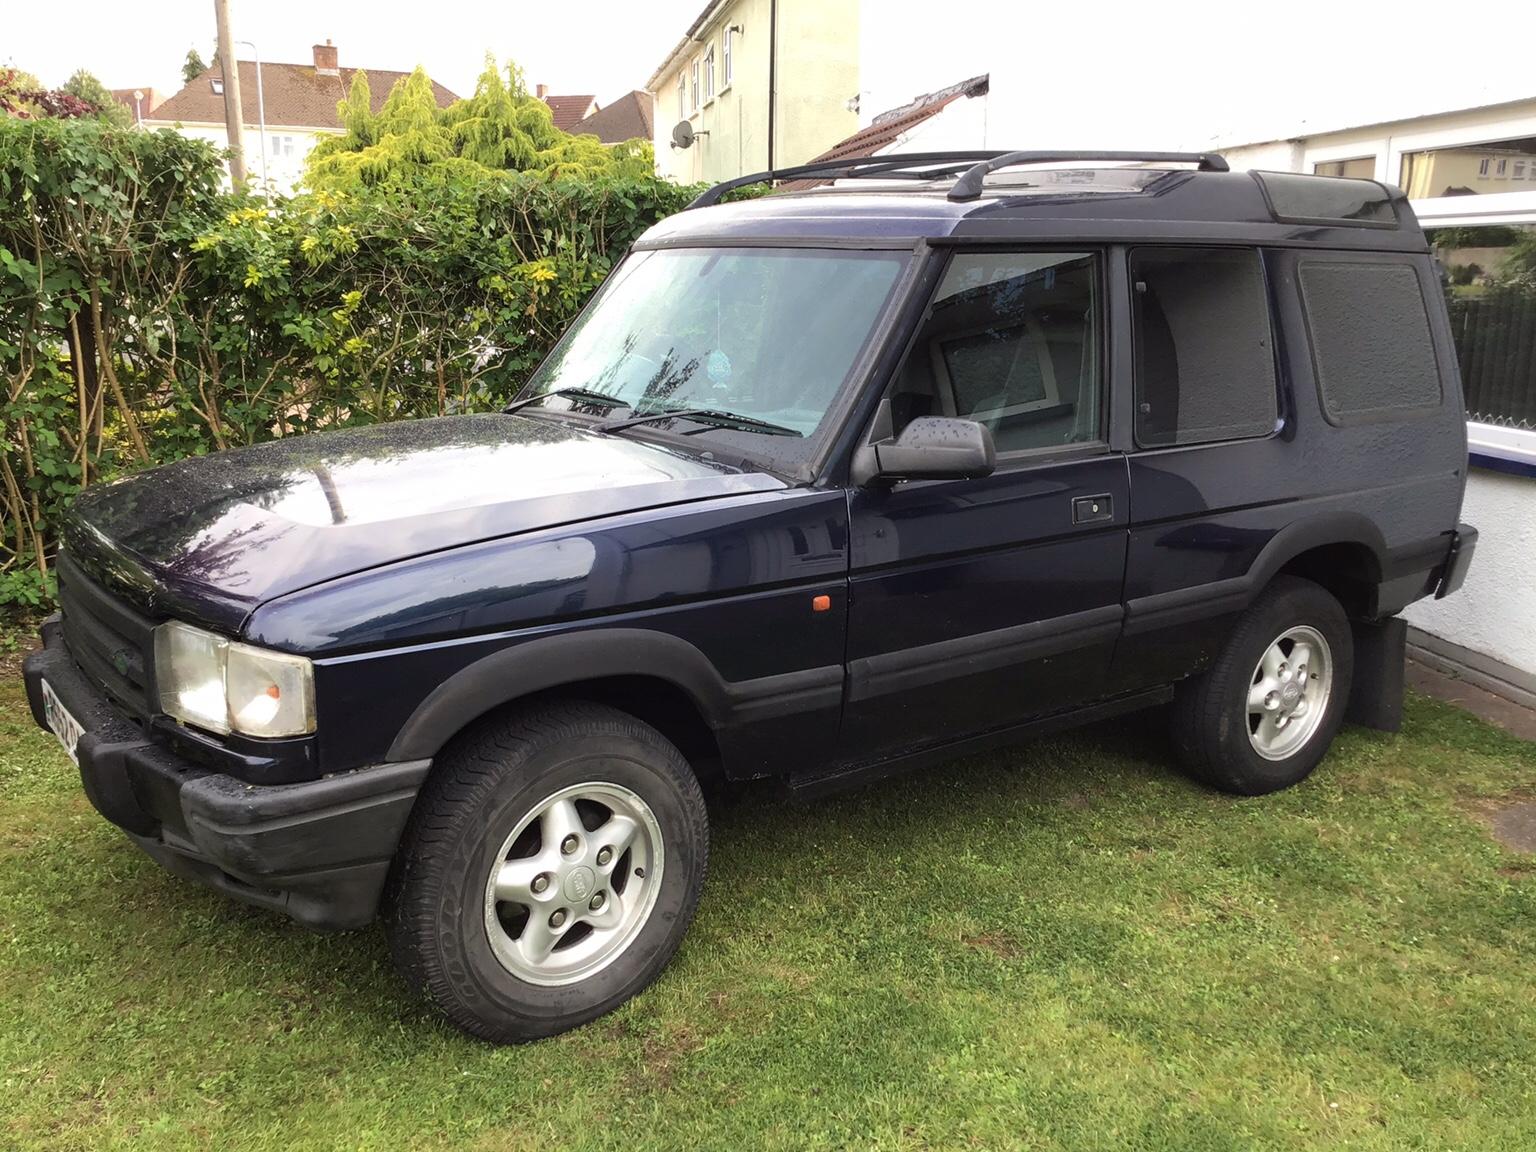 3 door Land Rover Discovery 300tdi, 7 seater in CF Cardiff